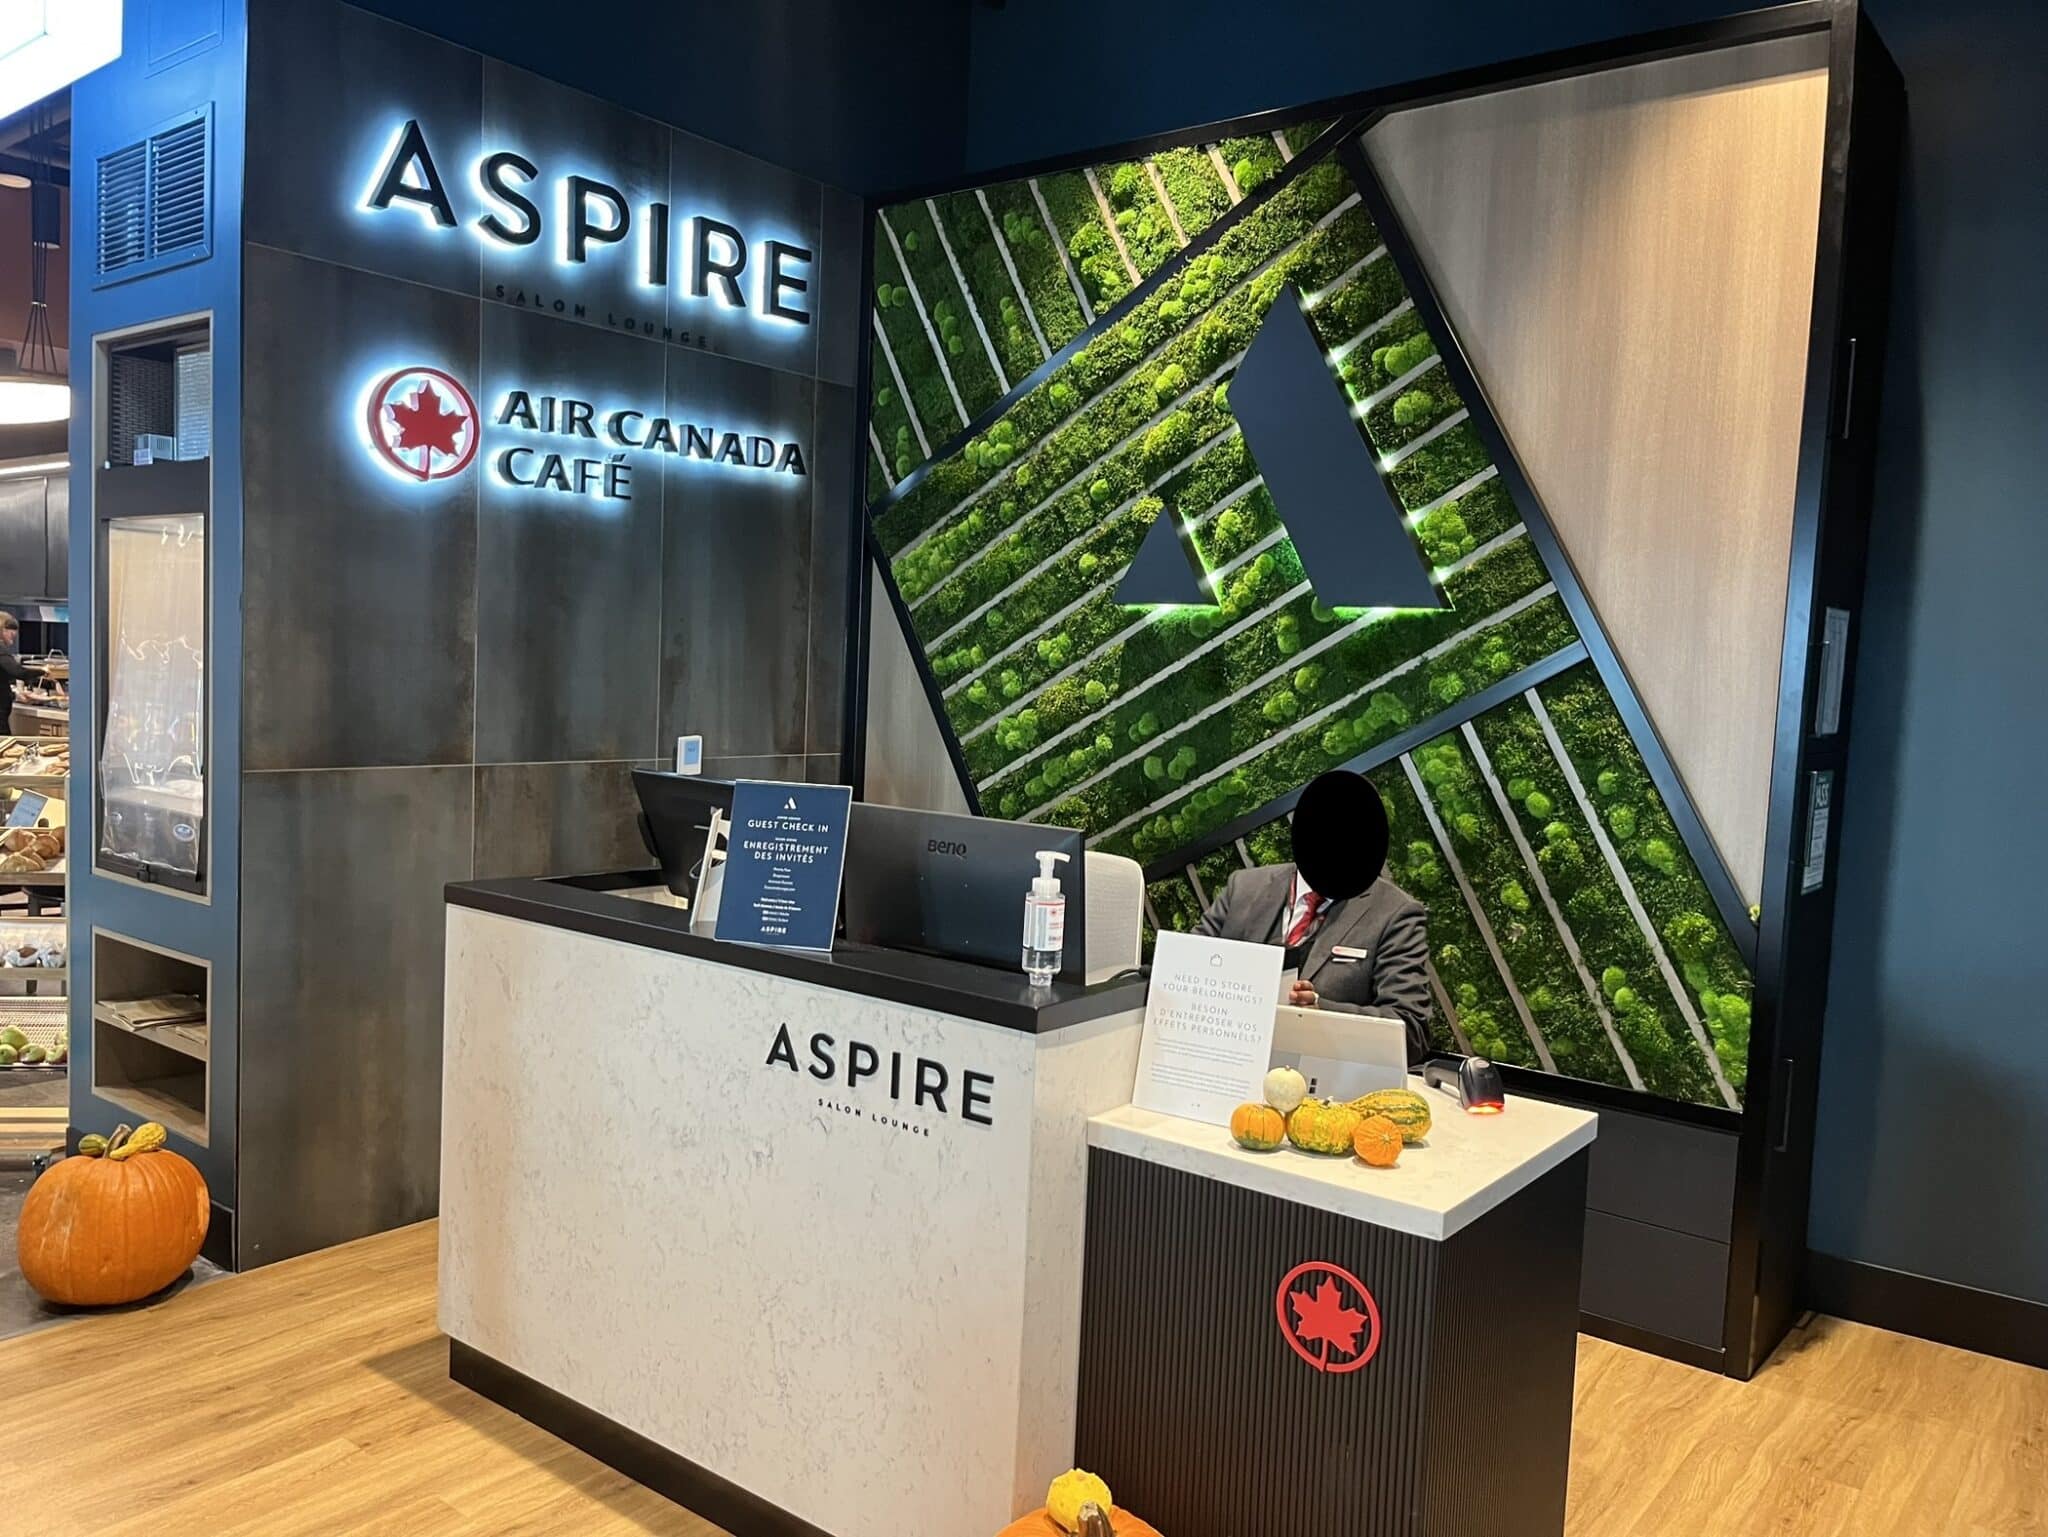 Front desk of the Aspire Air Canada Cafe at Billy Bishop airport.